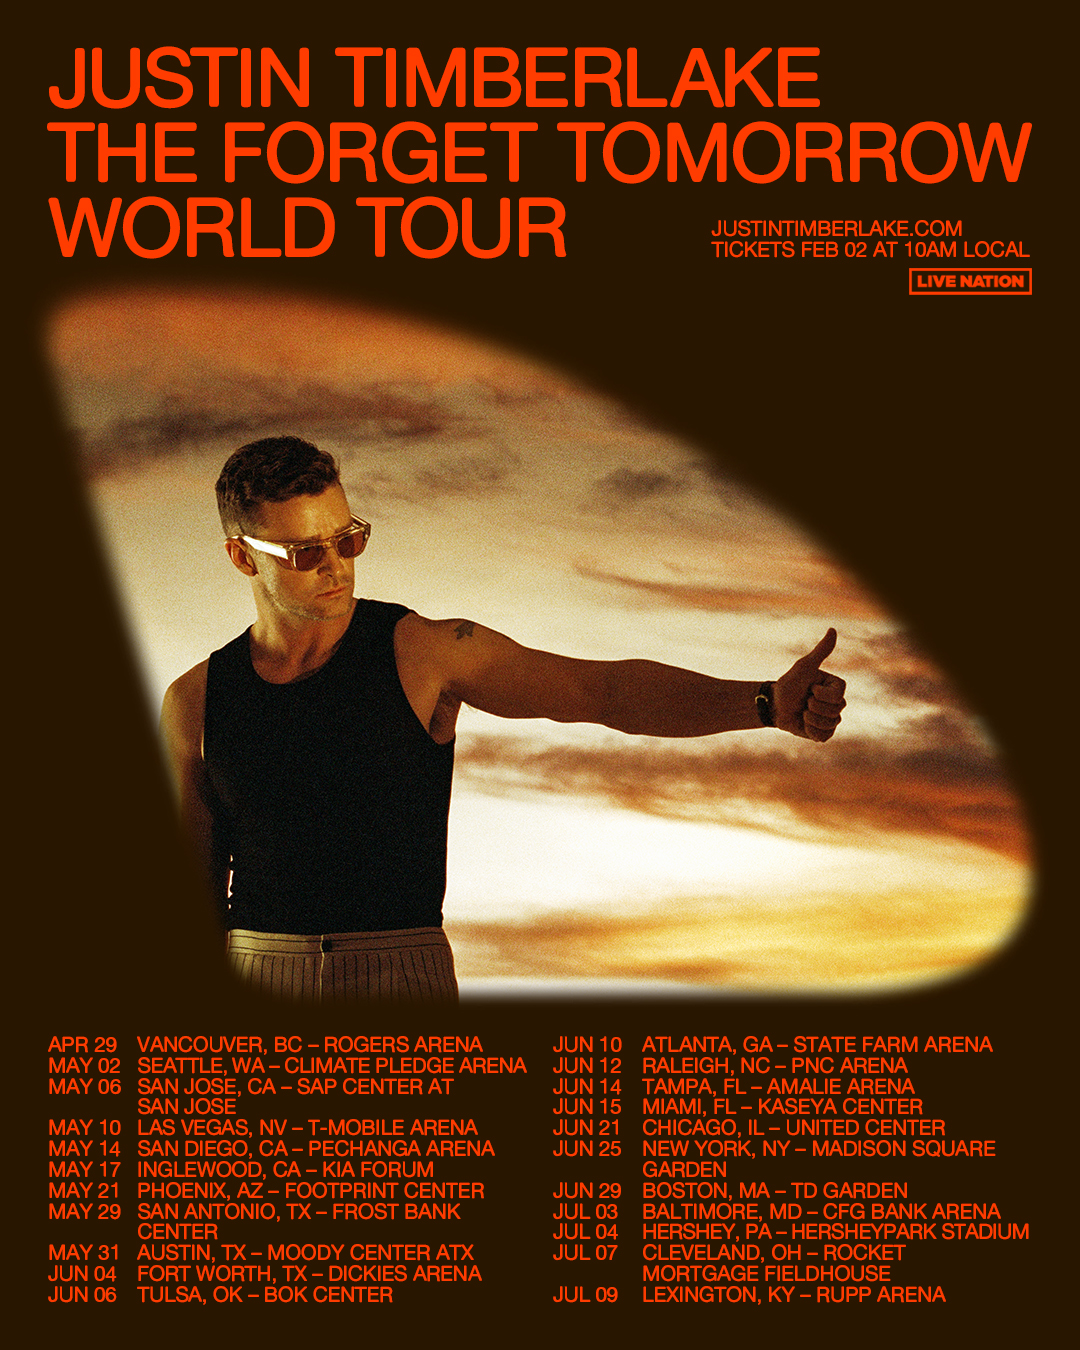 Justin Timberlake - The Forget Tomorrow World Tour at Moody Center ATX Tickets